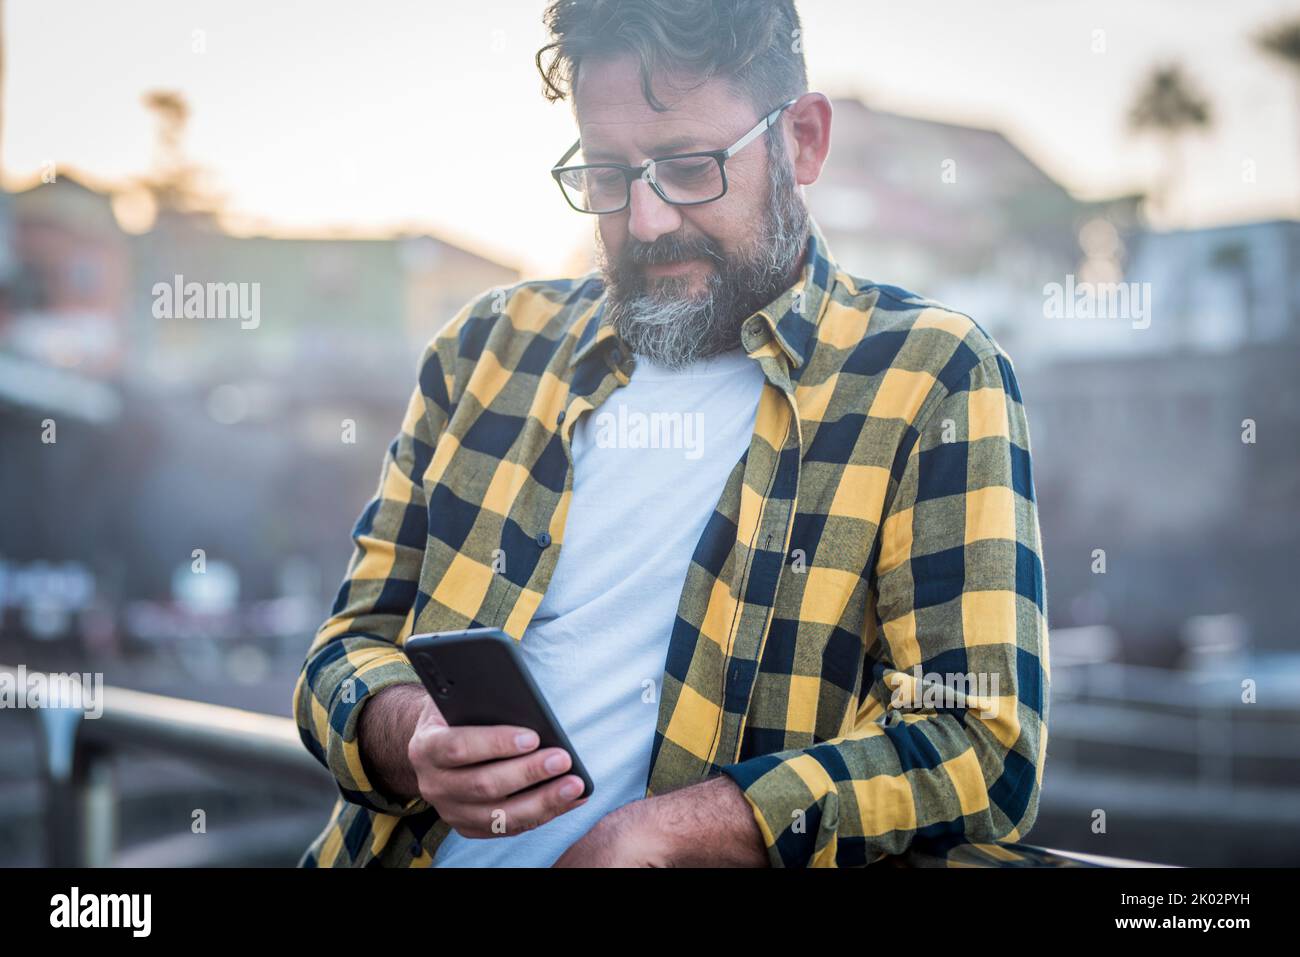 Mature bearded man use mobile phone with internet wireless connection wearing glasses. Adult male people chatting with smartphone outside. Sunlight in background. Leisure activity Stock Photo